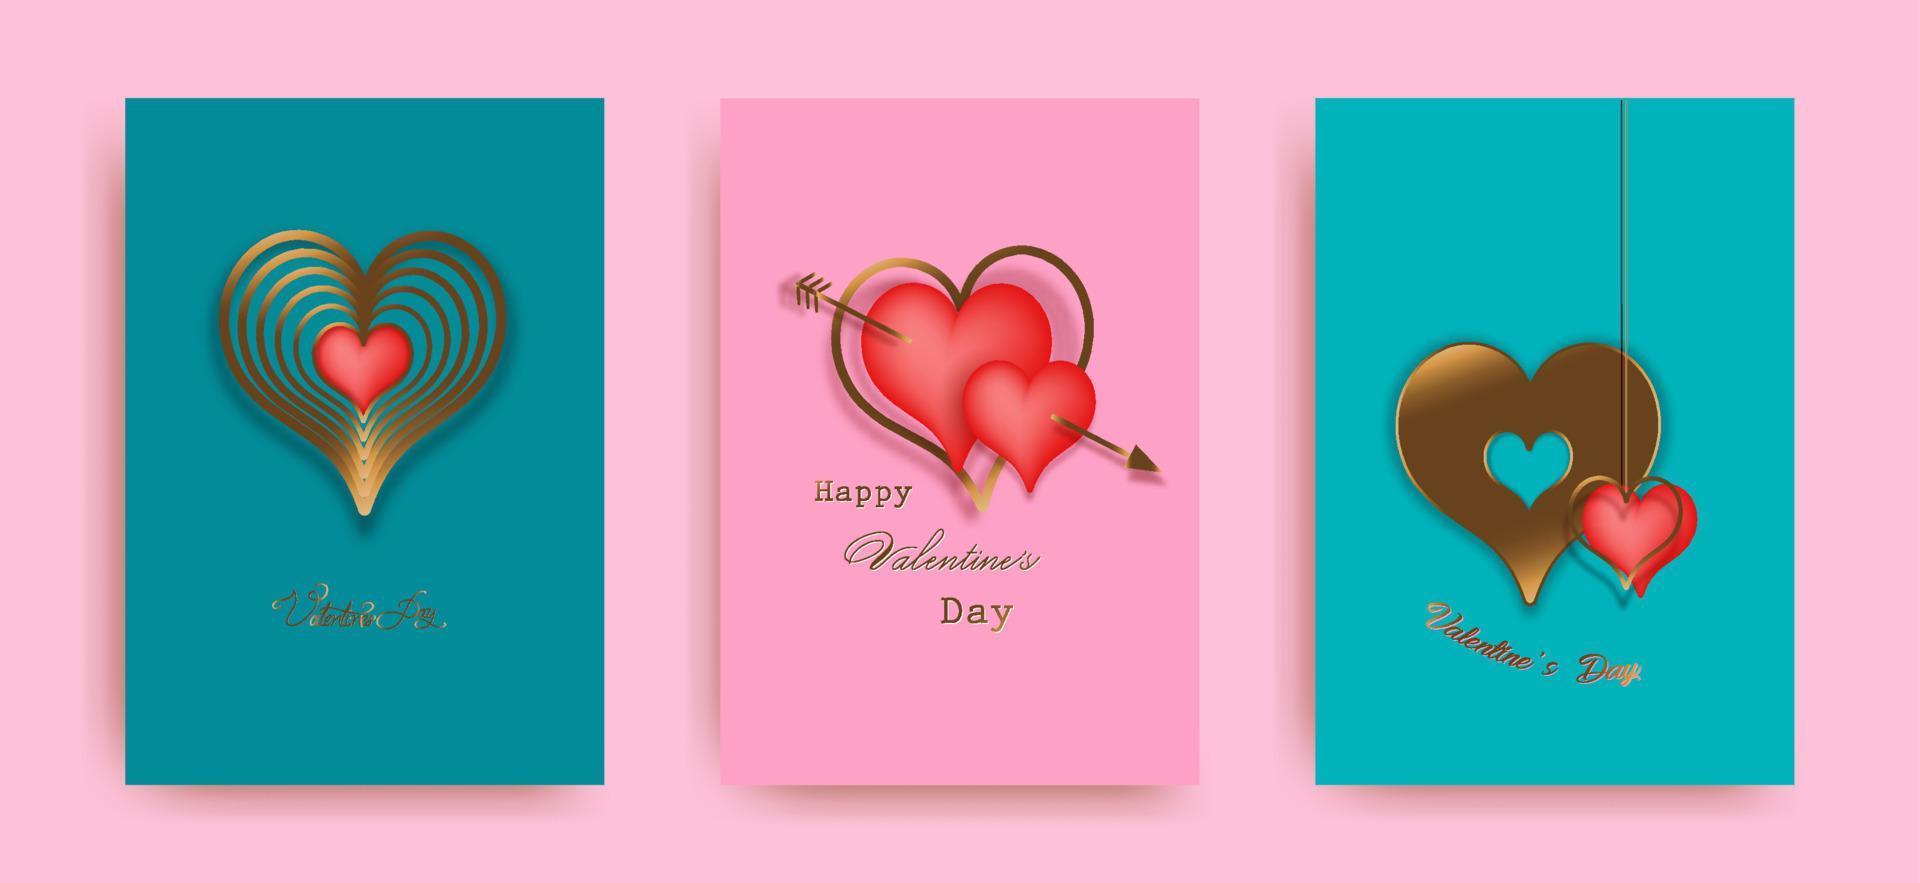 Happy Valentines day vector set greeting card. Gold and red hearts on pink and green background. Golden holiday poster with text, jewels. Concept for Valentines banner, flyer, party invitation, shop